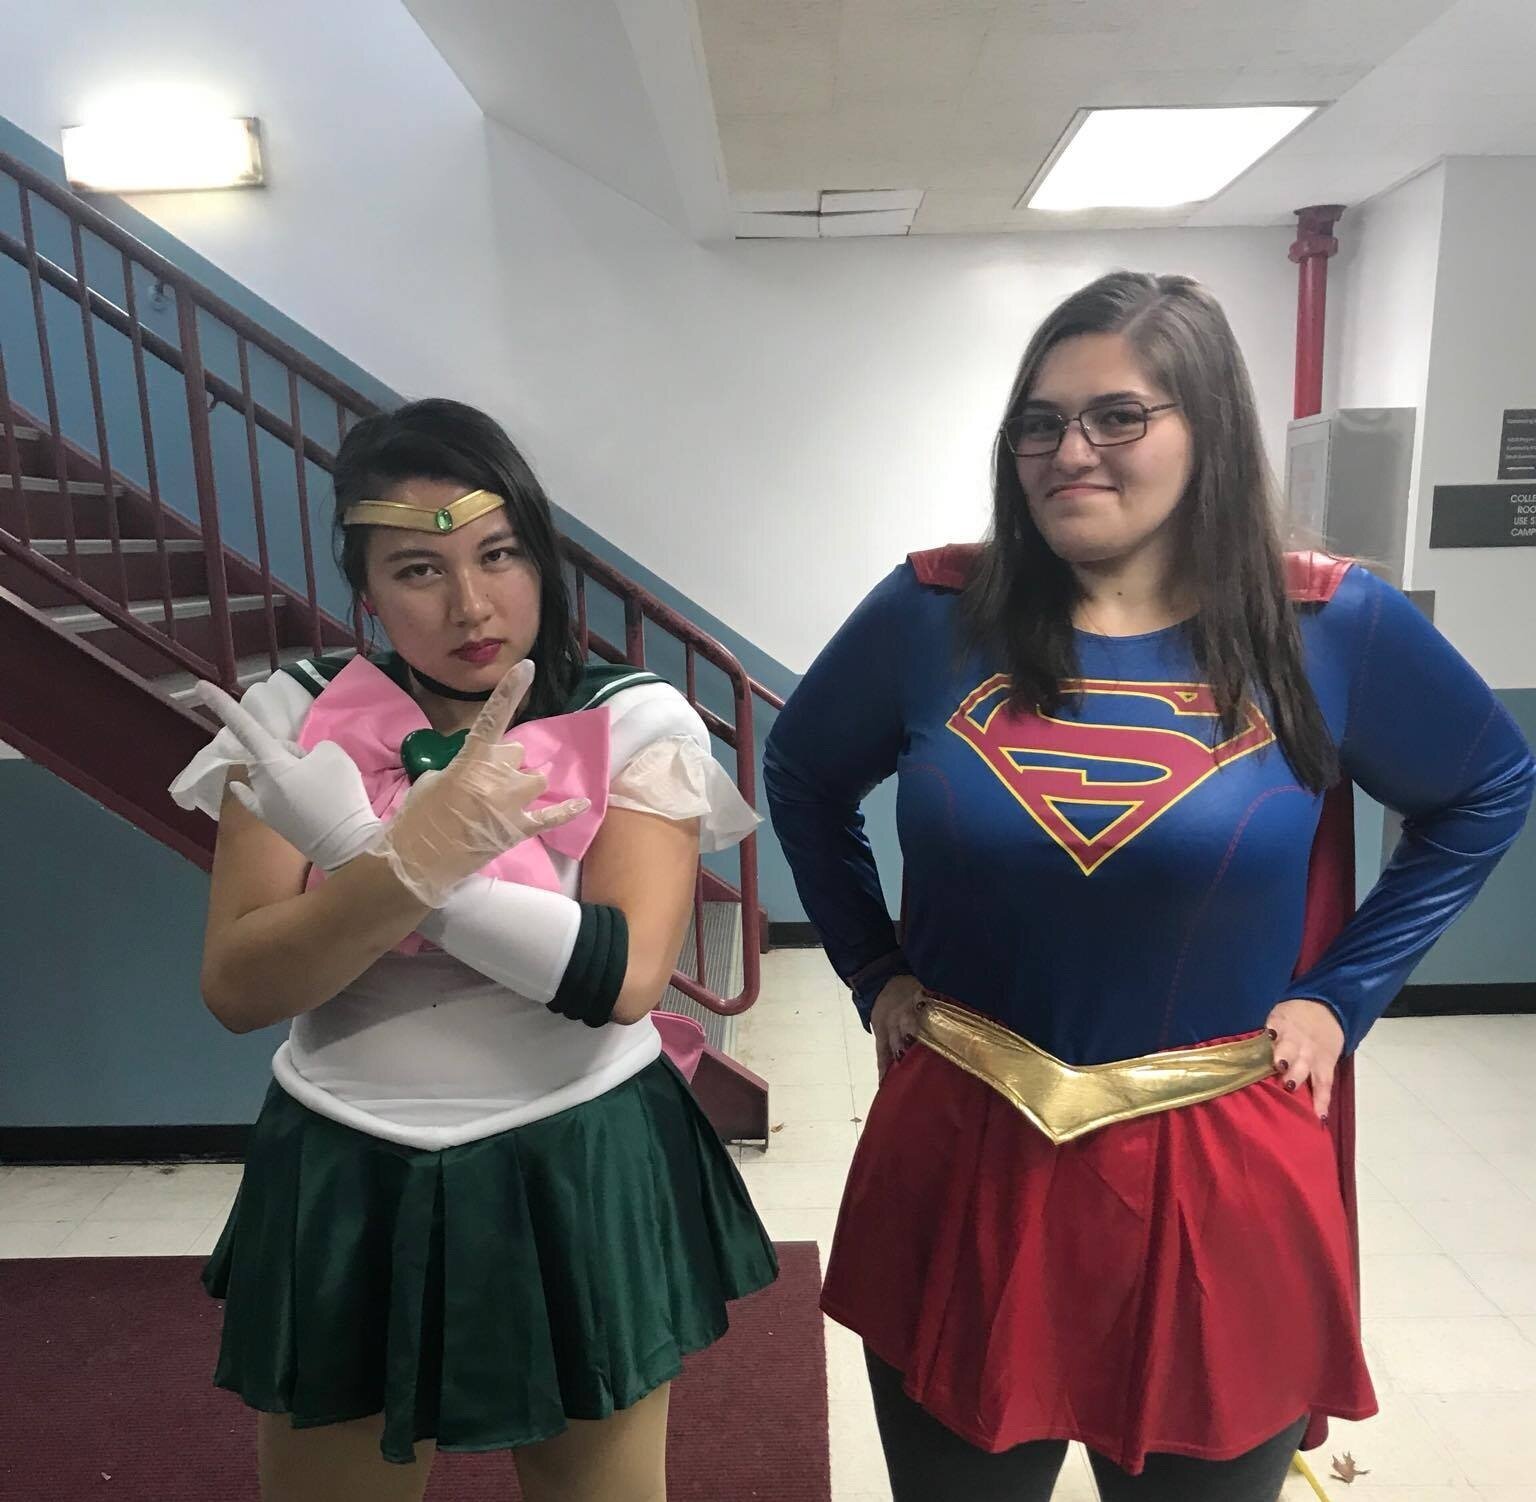 Obscura members Kat Fornier and Brittany Aufiero embraced the spirit of Halloween when they showed up to Obscura’s Halloween bake sale in full costume. It doesn’t get much better than a cupcake served to you by Jupiter or Supergirl!